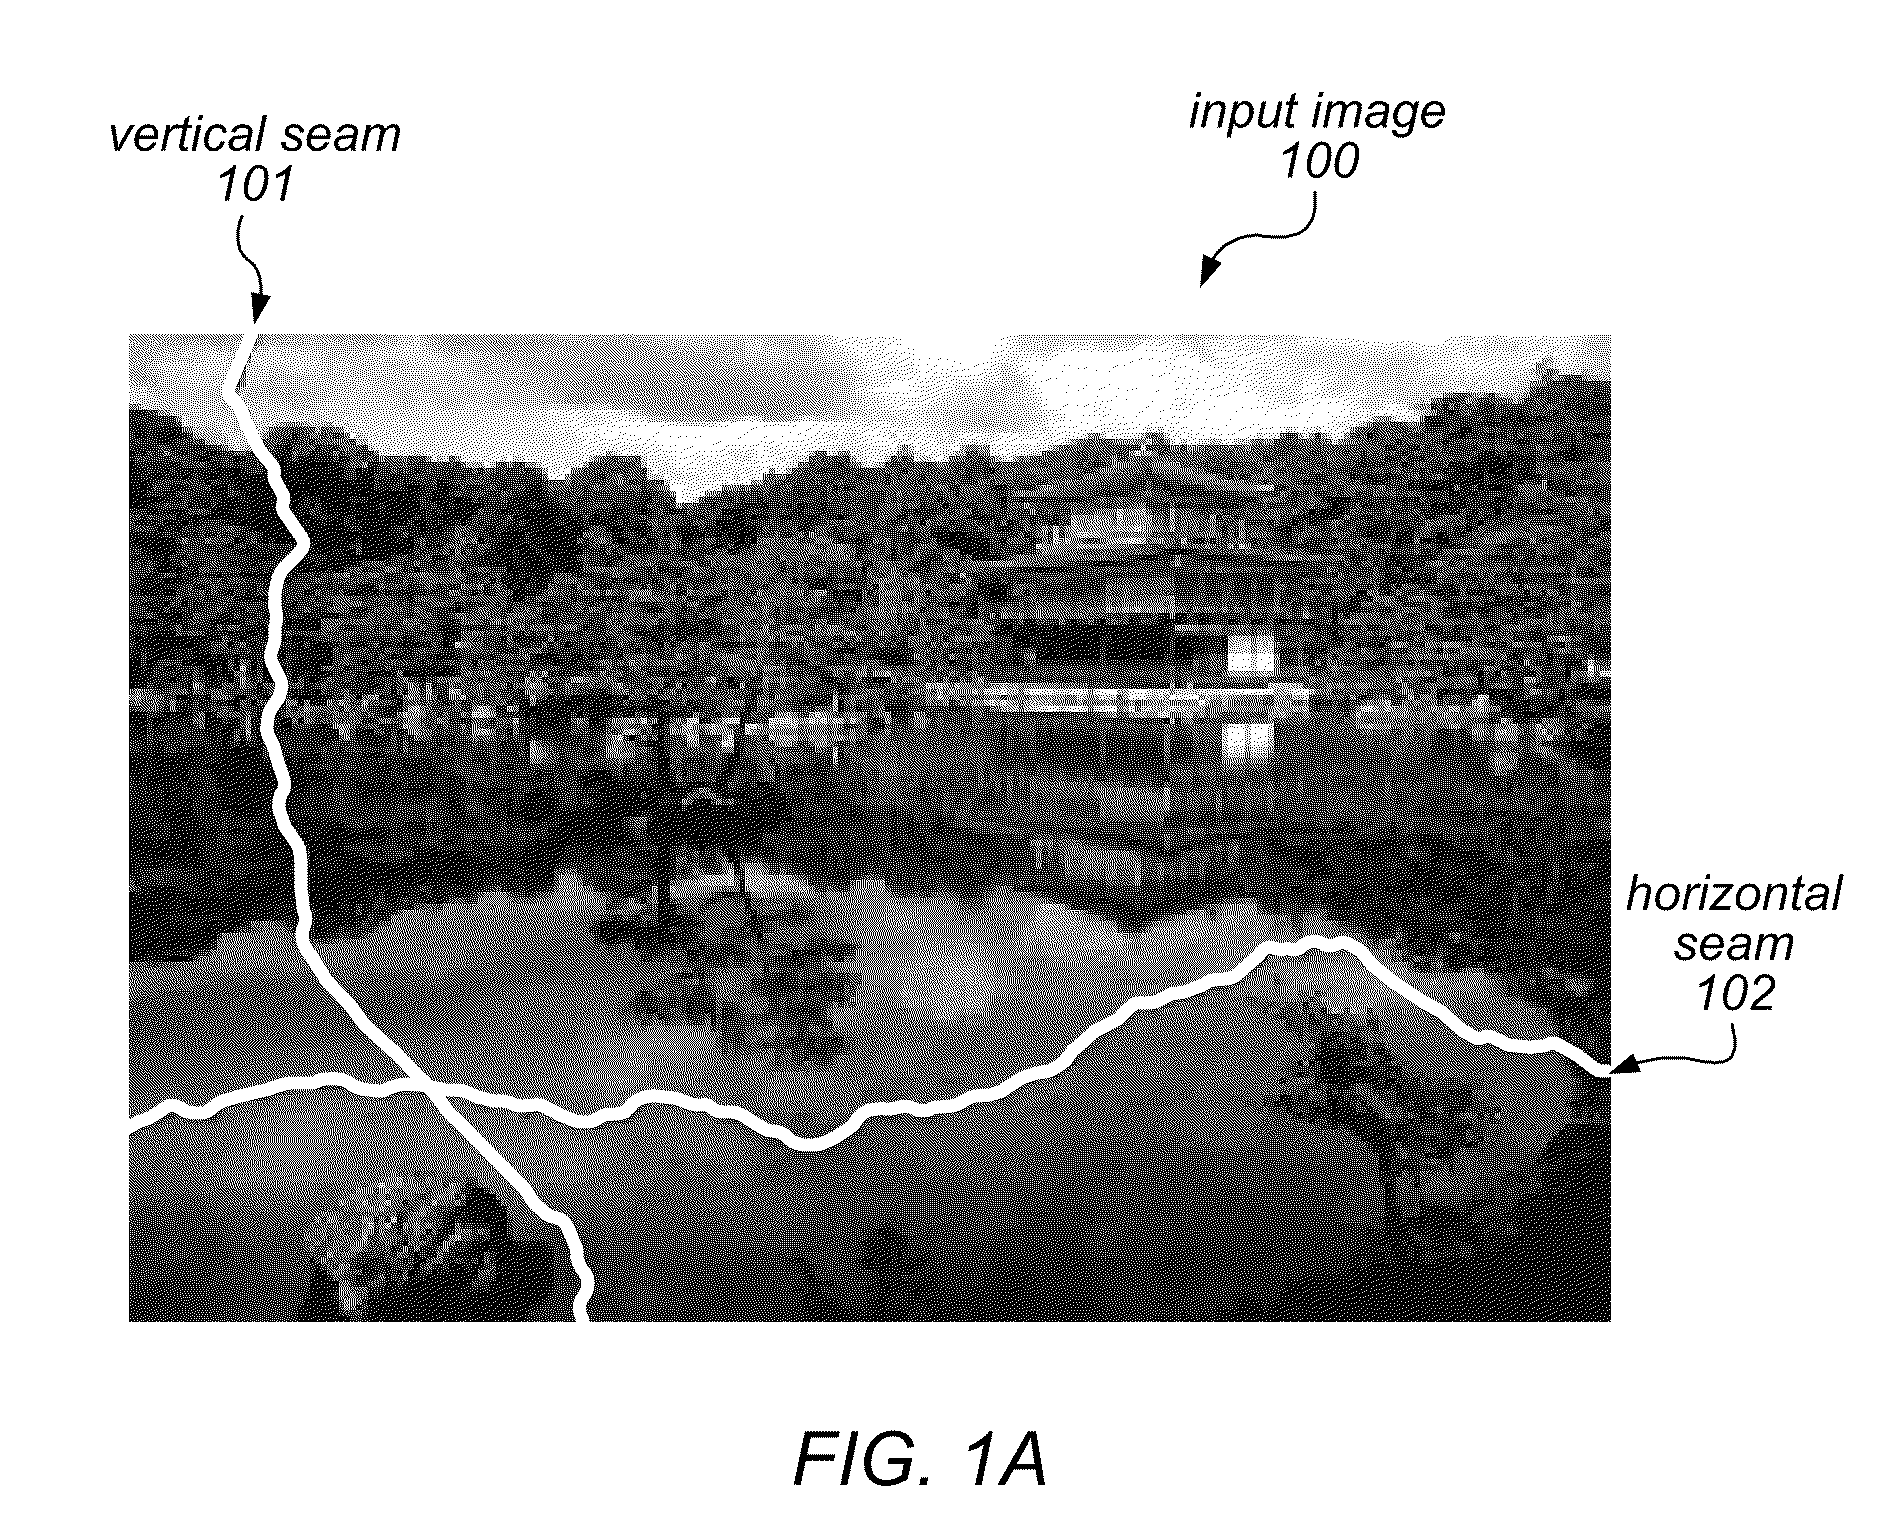 System and Method for Content Aware Hybrid Cropping and Seam Carving of Images